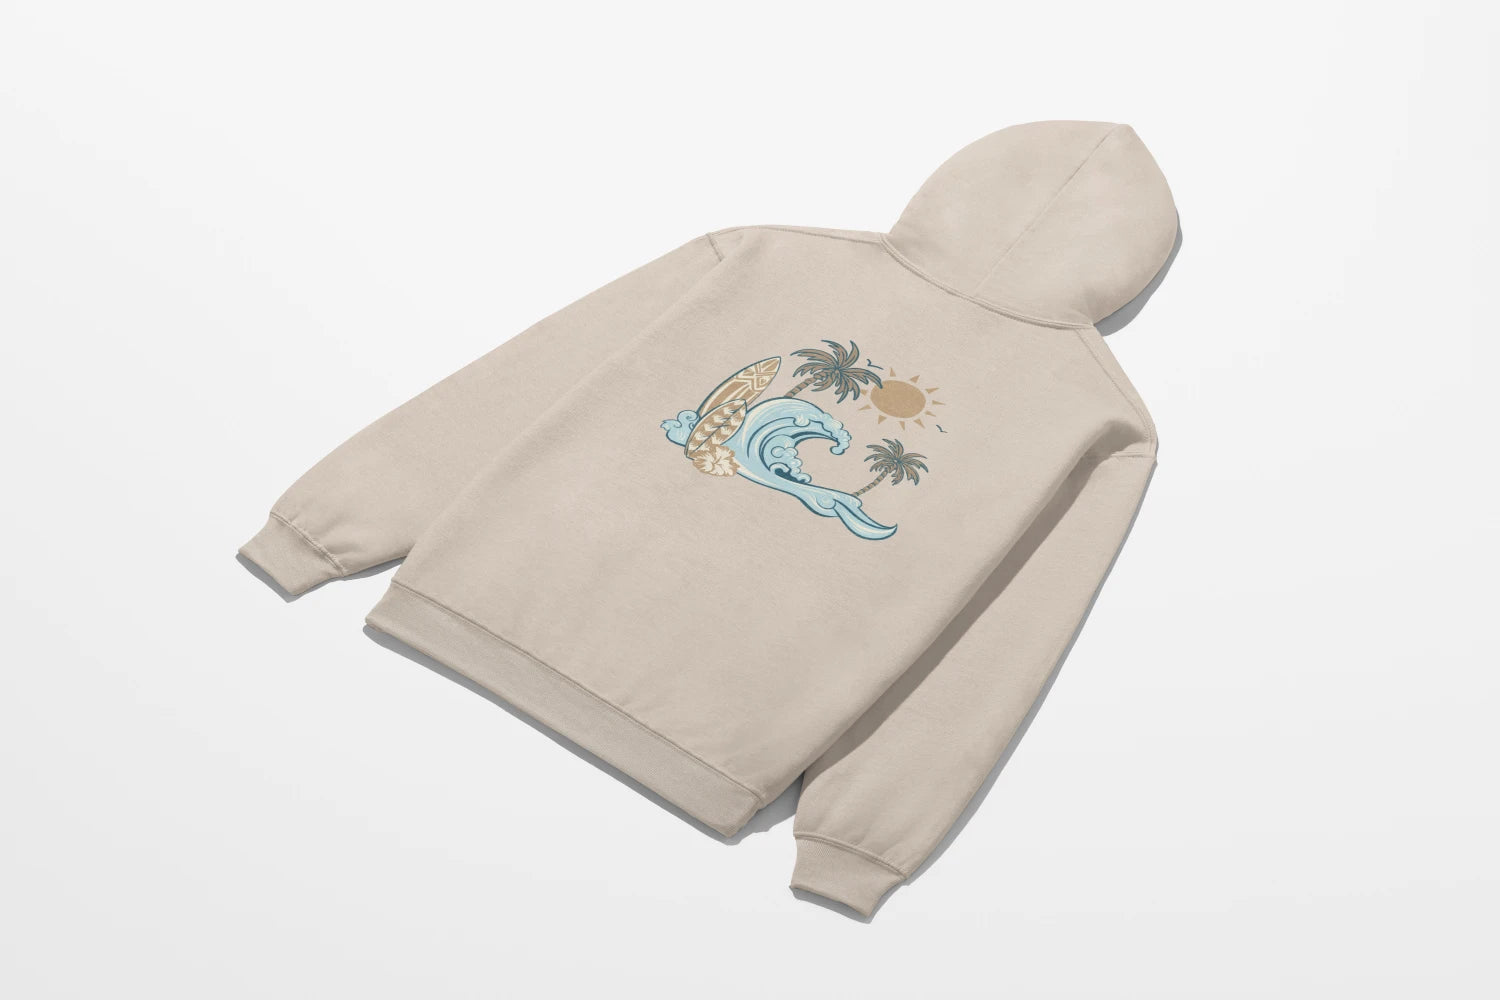 A Nalu o ka Mana (Waves of Faith) Hoodie with an image of palm trees from the Be Still and Know brand.